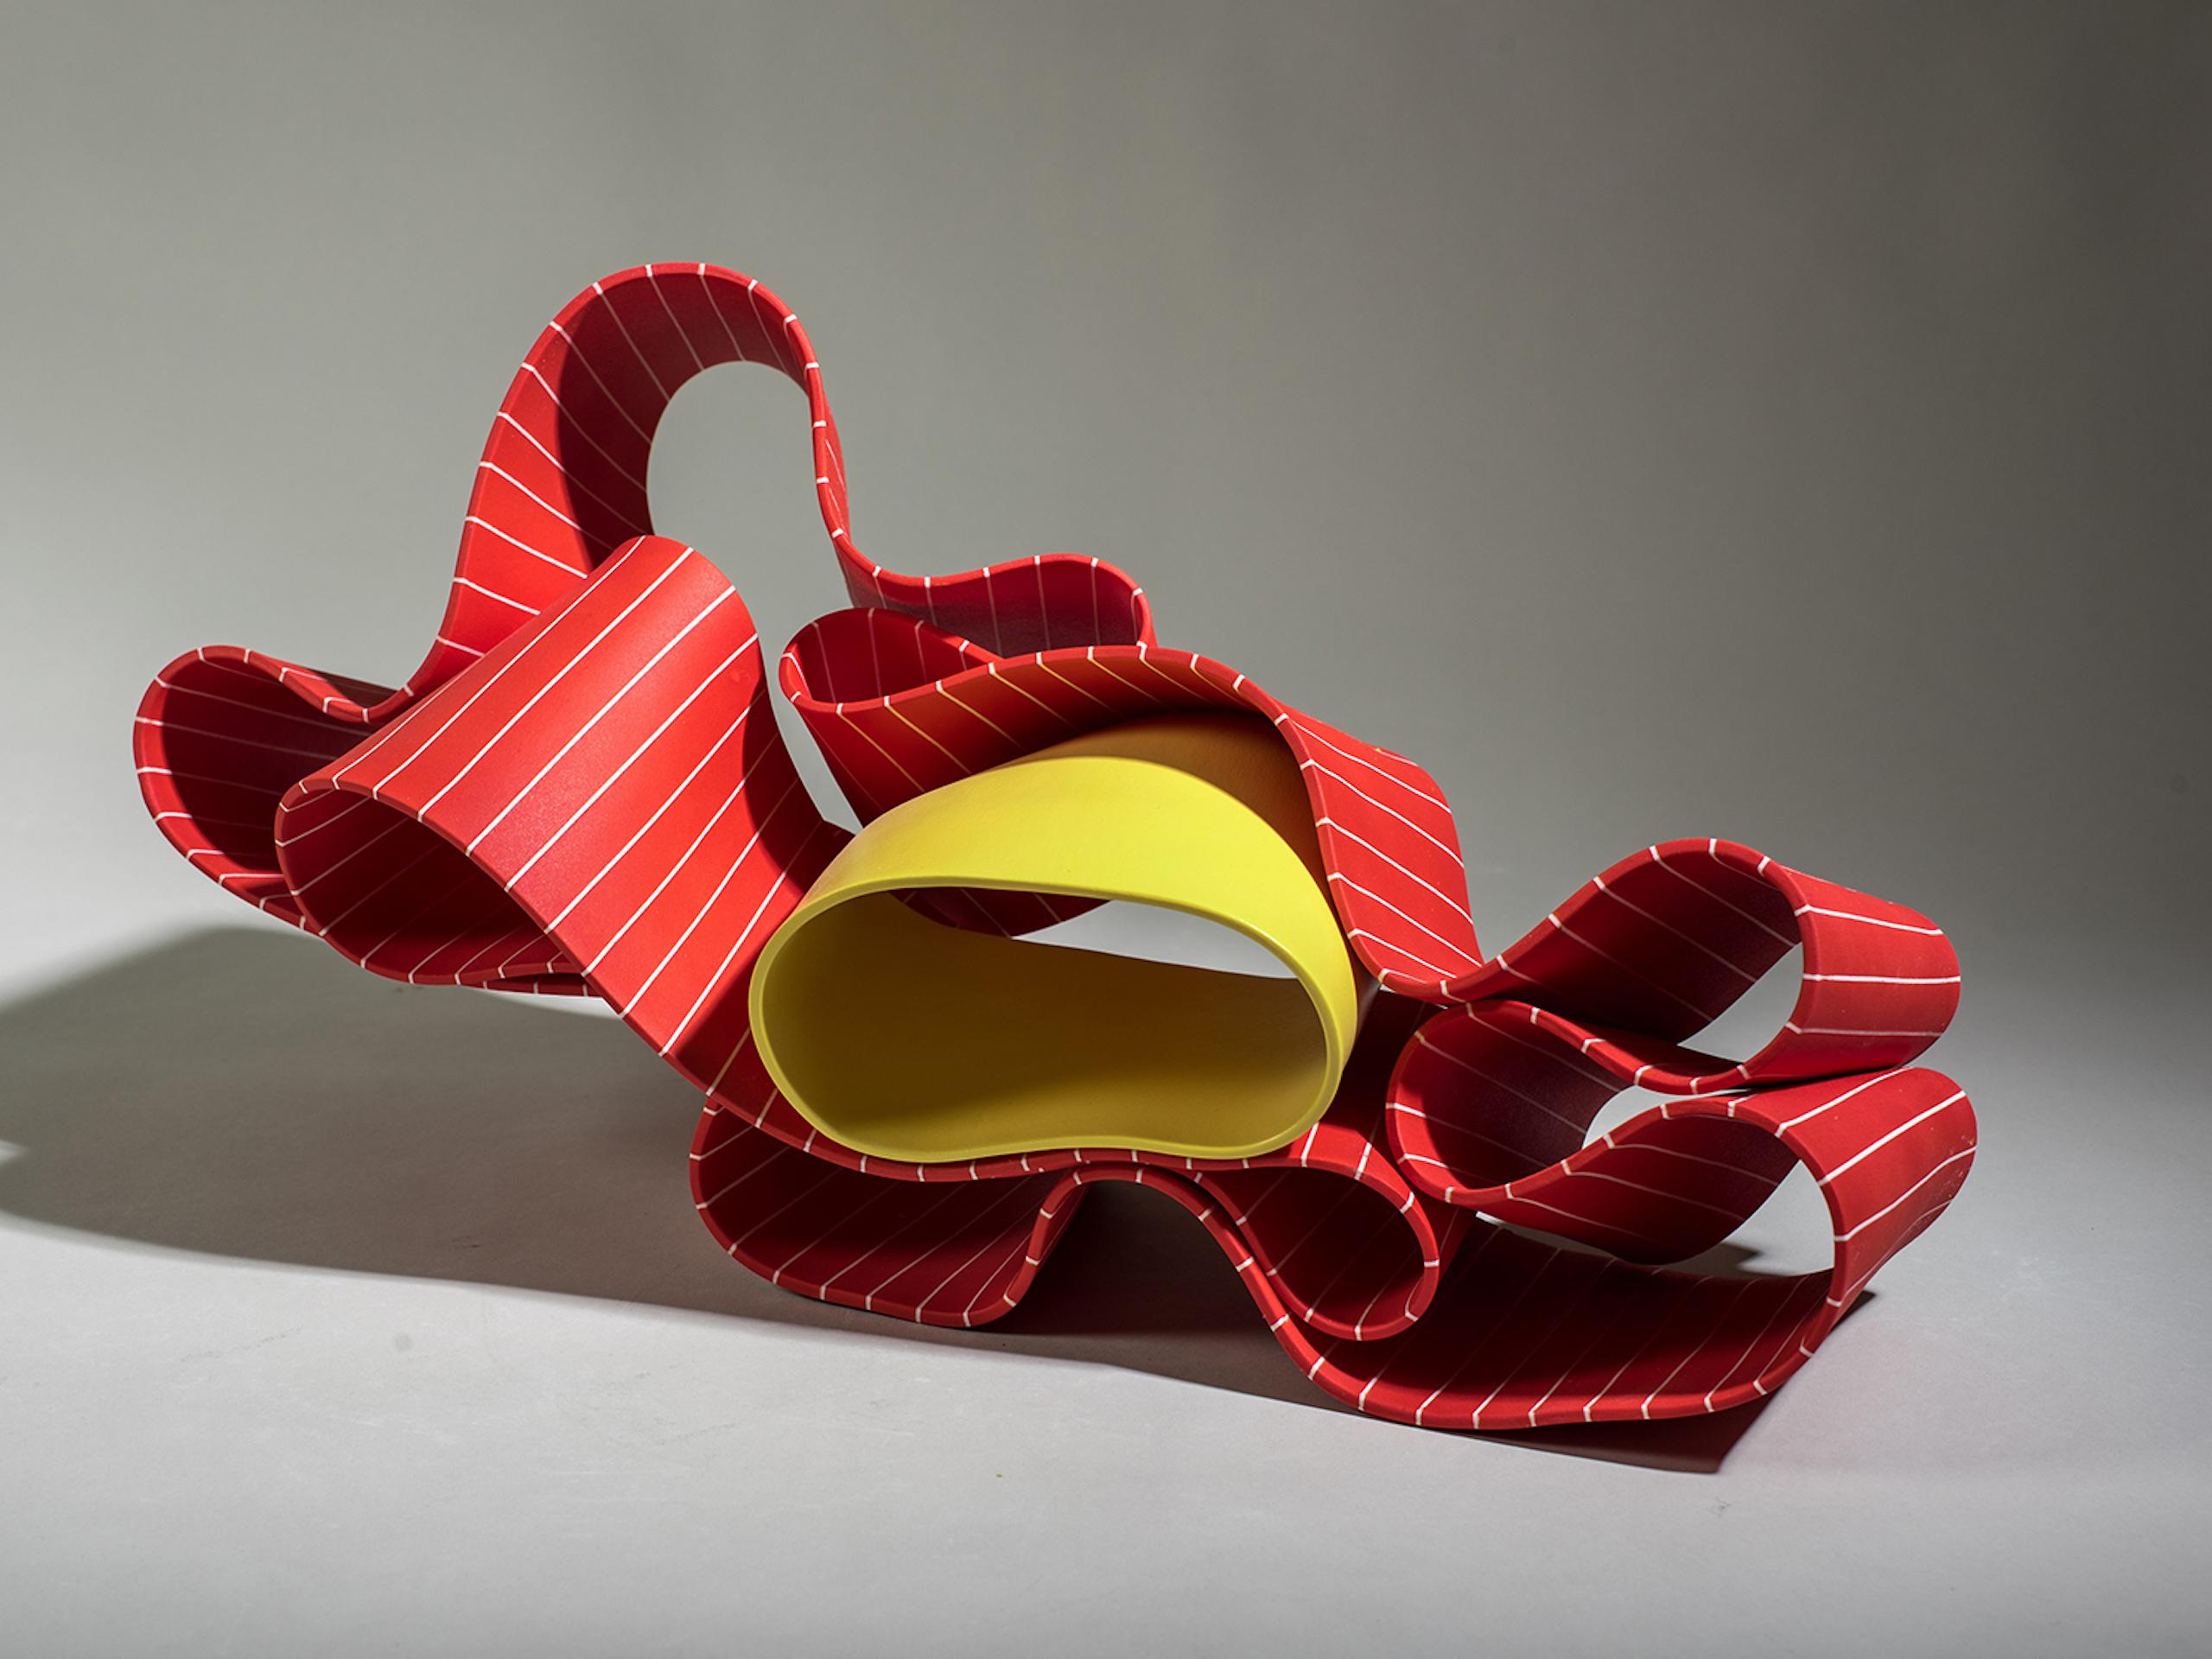 Folding in Motion 1 by Simcha Even-Chen - porcelain sculpture, red and yellow For Sale 1